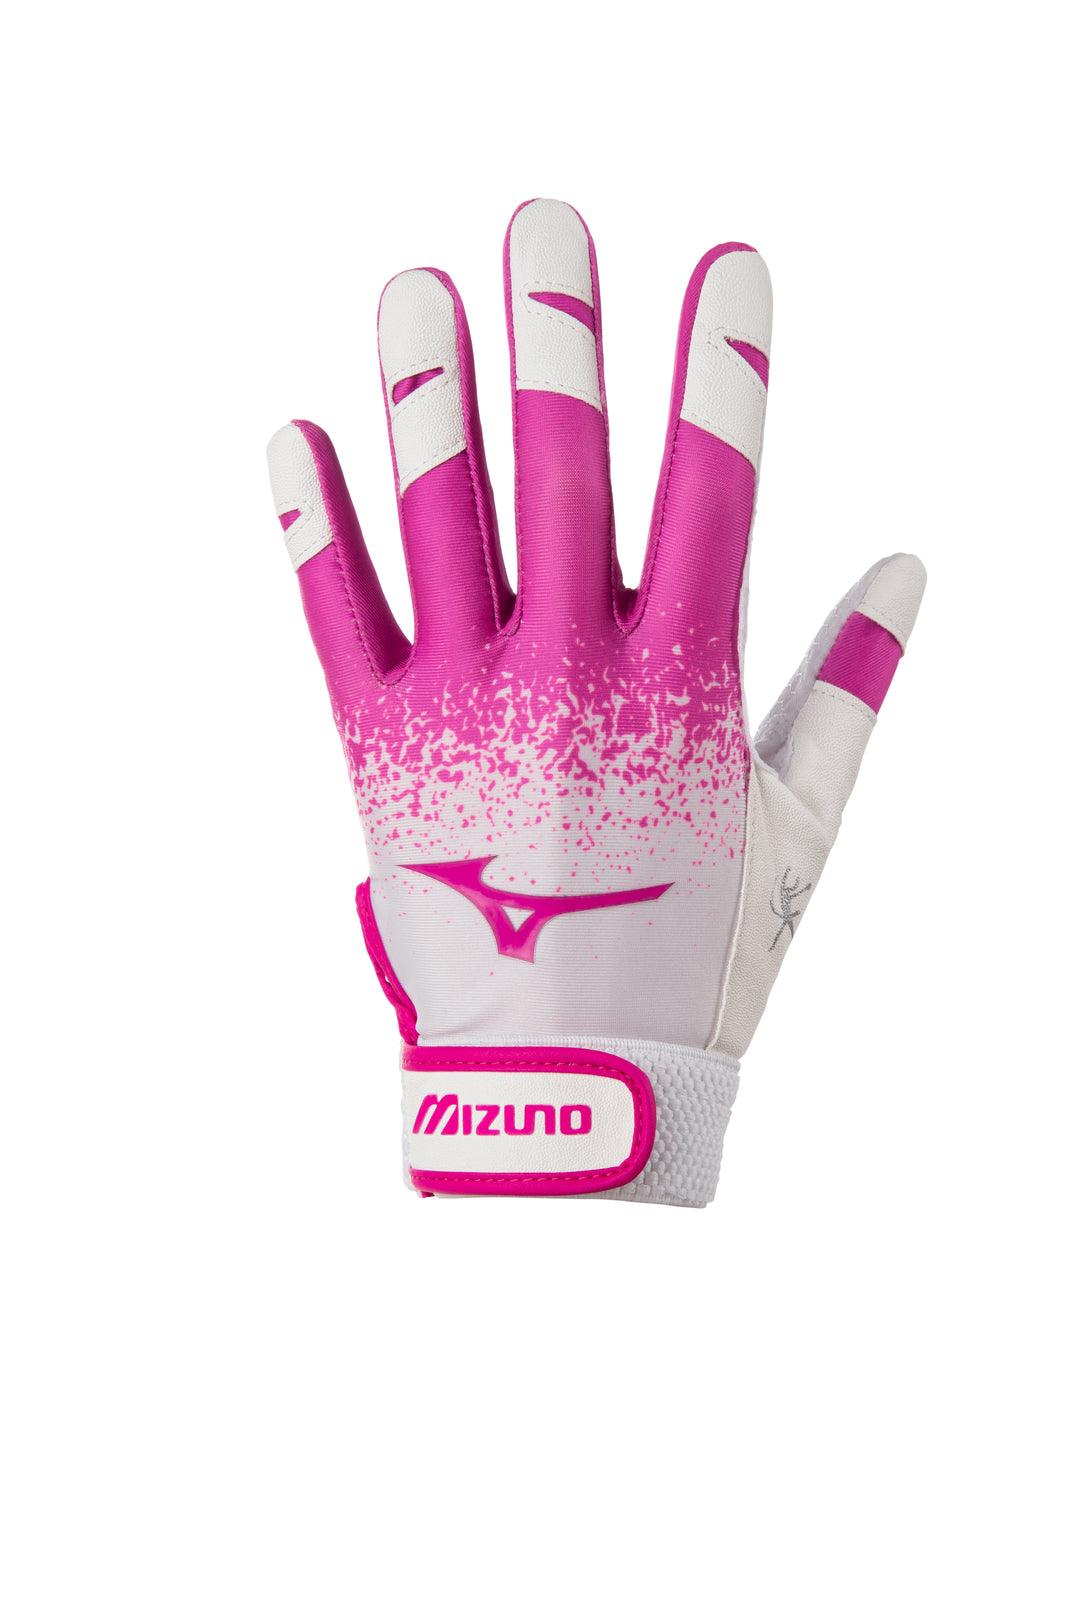 Finch Youth Softball Batting Glove - Sports Excellence